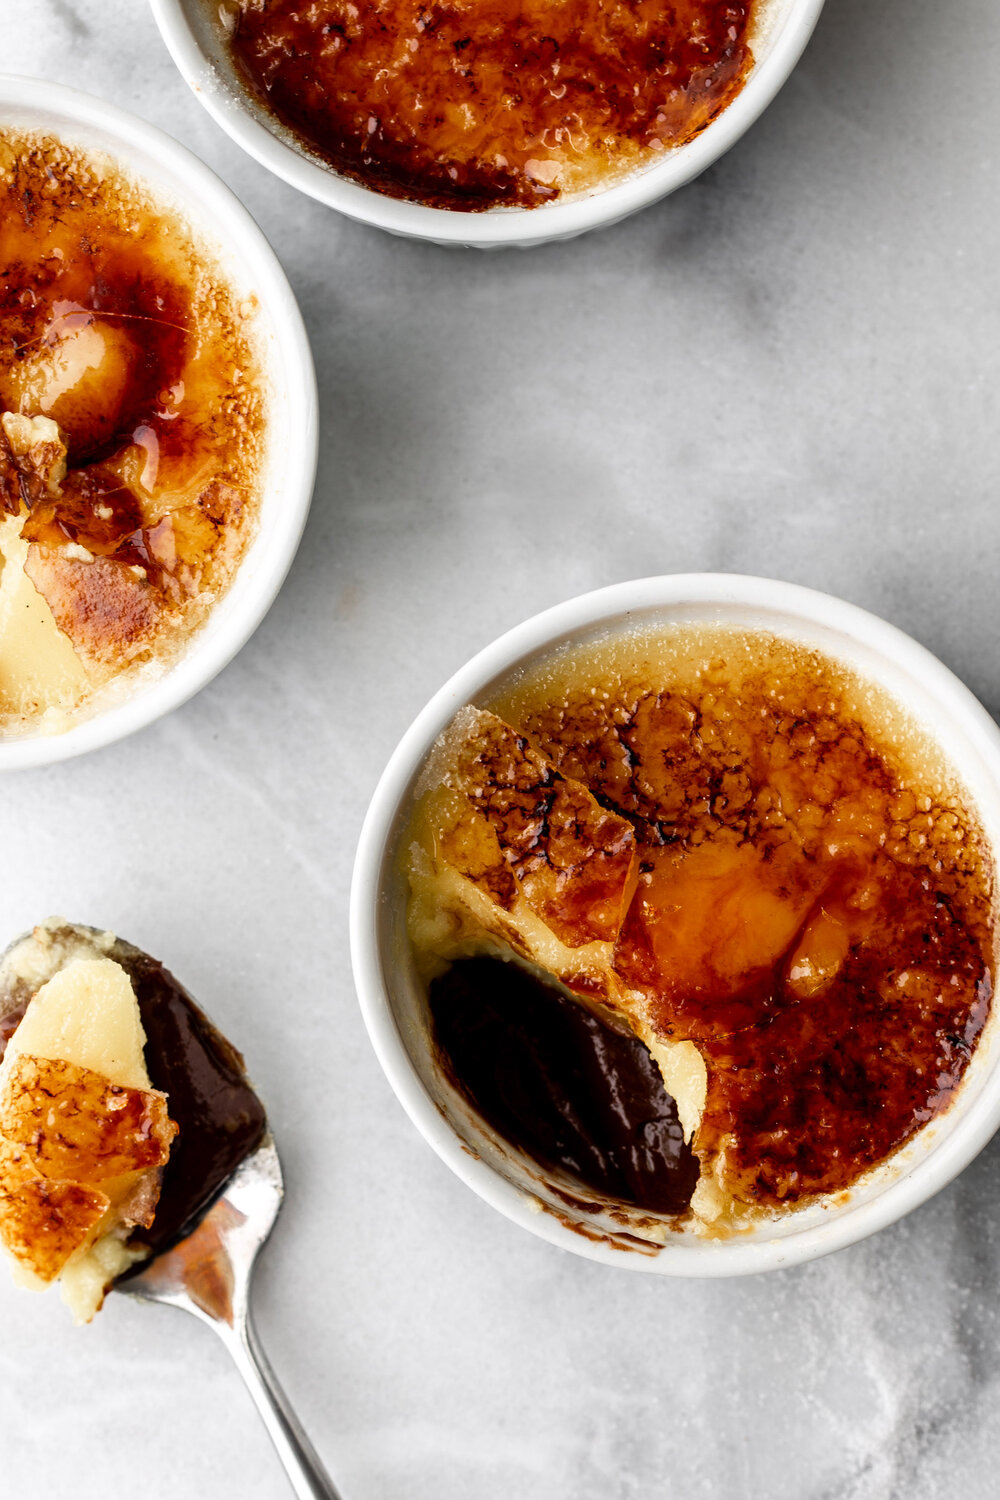 Tuxedo creme brulee recipe with spoon